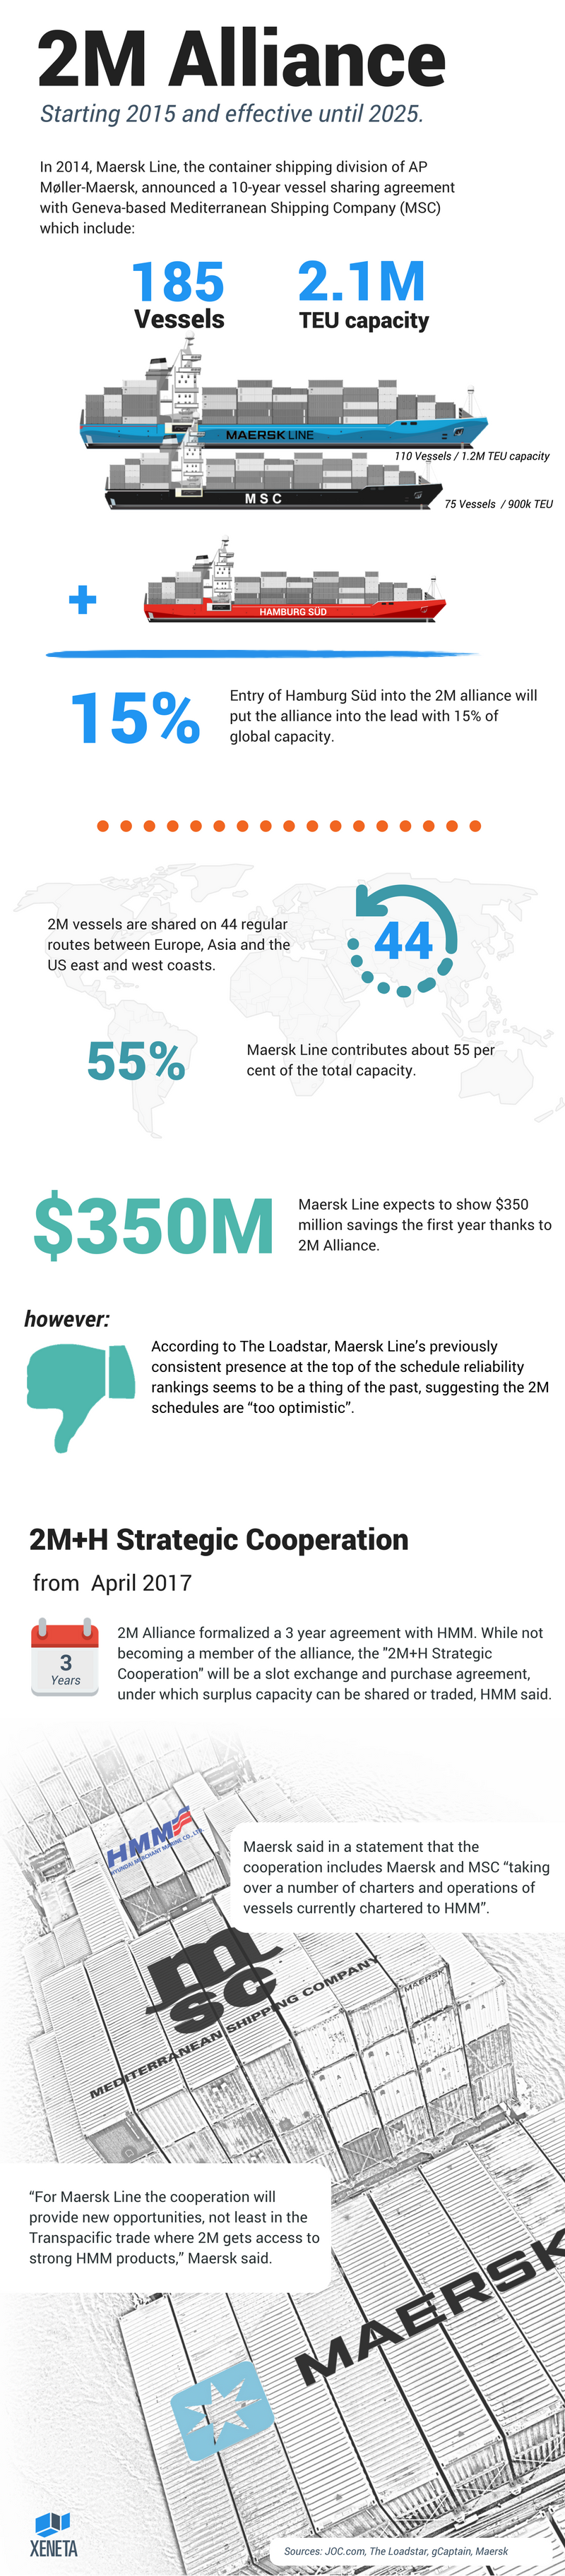 [INFOGRAPHIC] Things to Know about the 2M Alliance